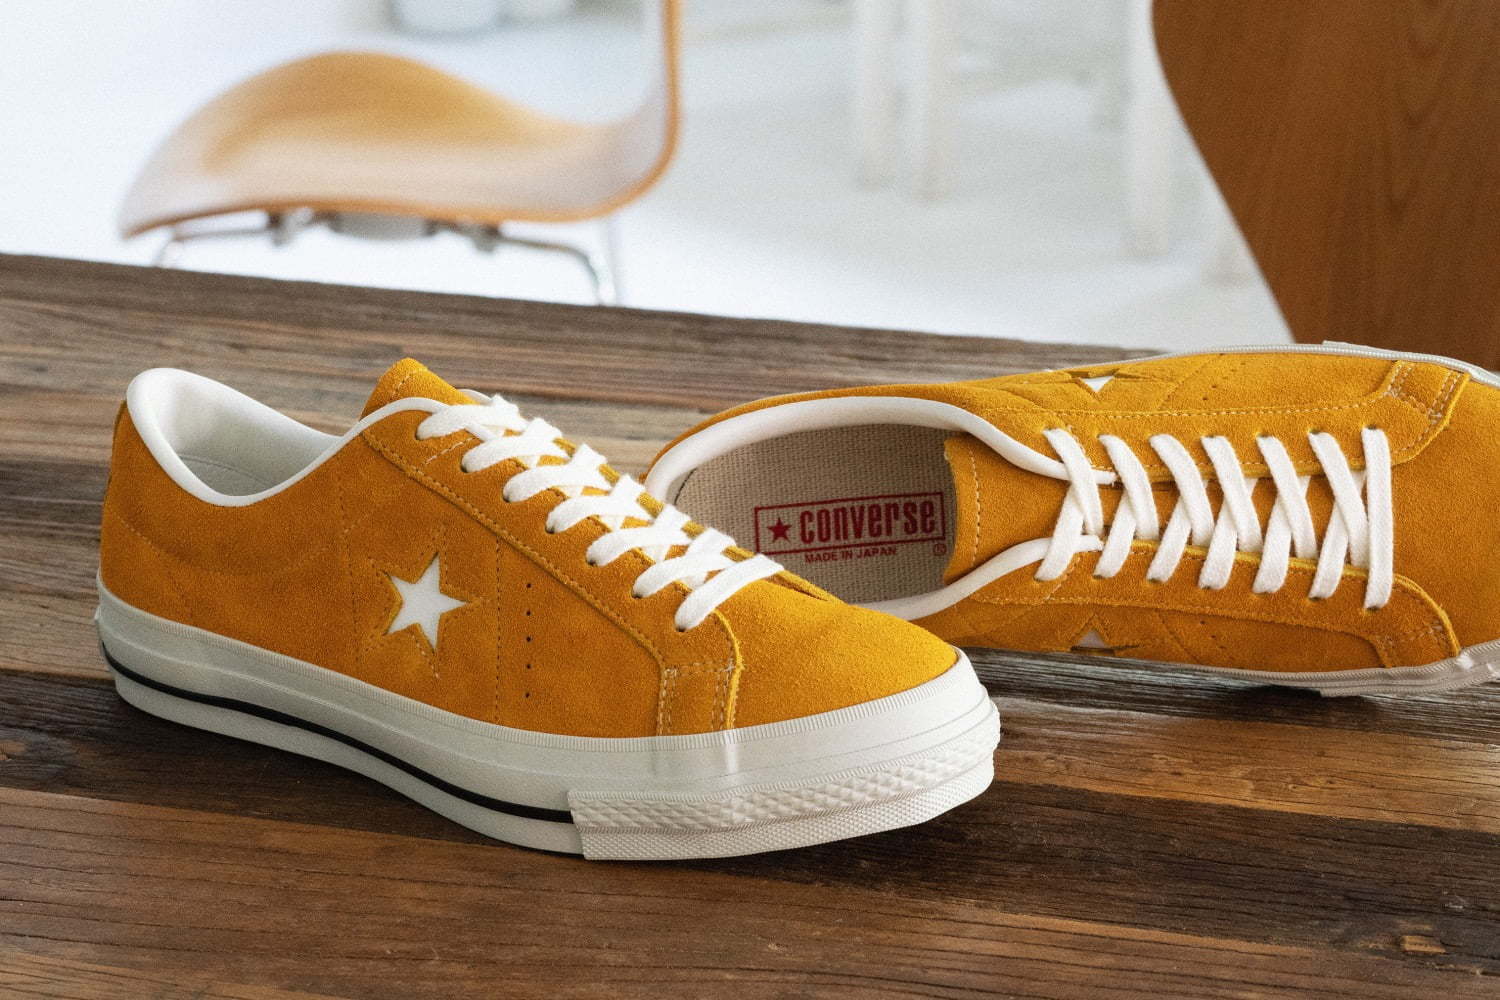 CONVERSE ONE STAR J SUEDE GOLD ワンスター　23